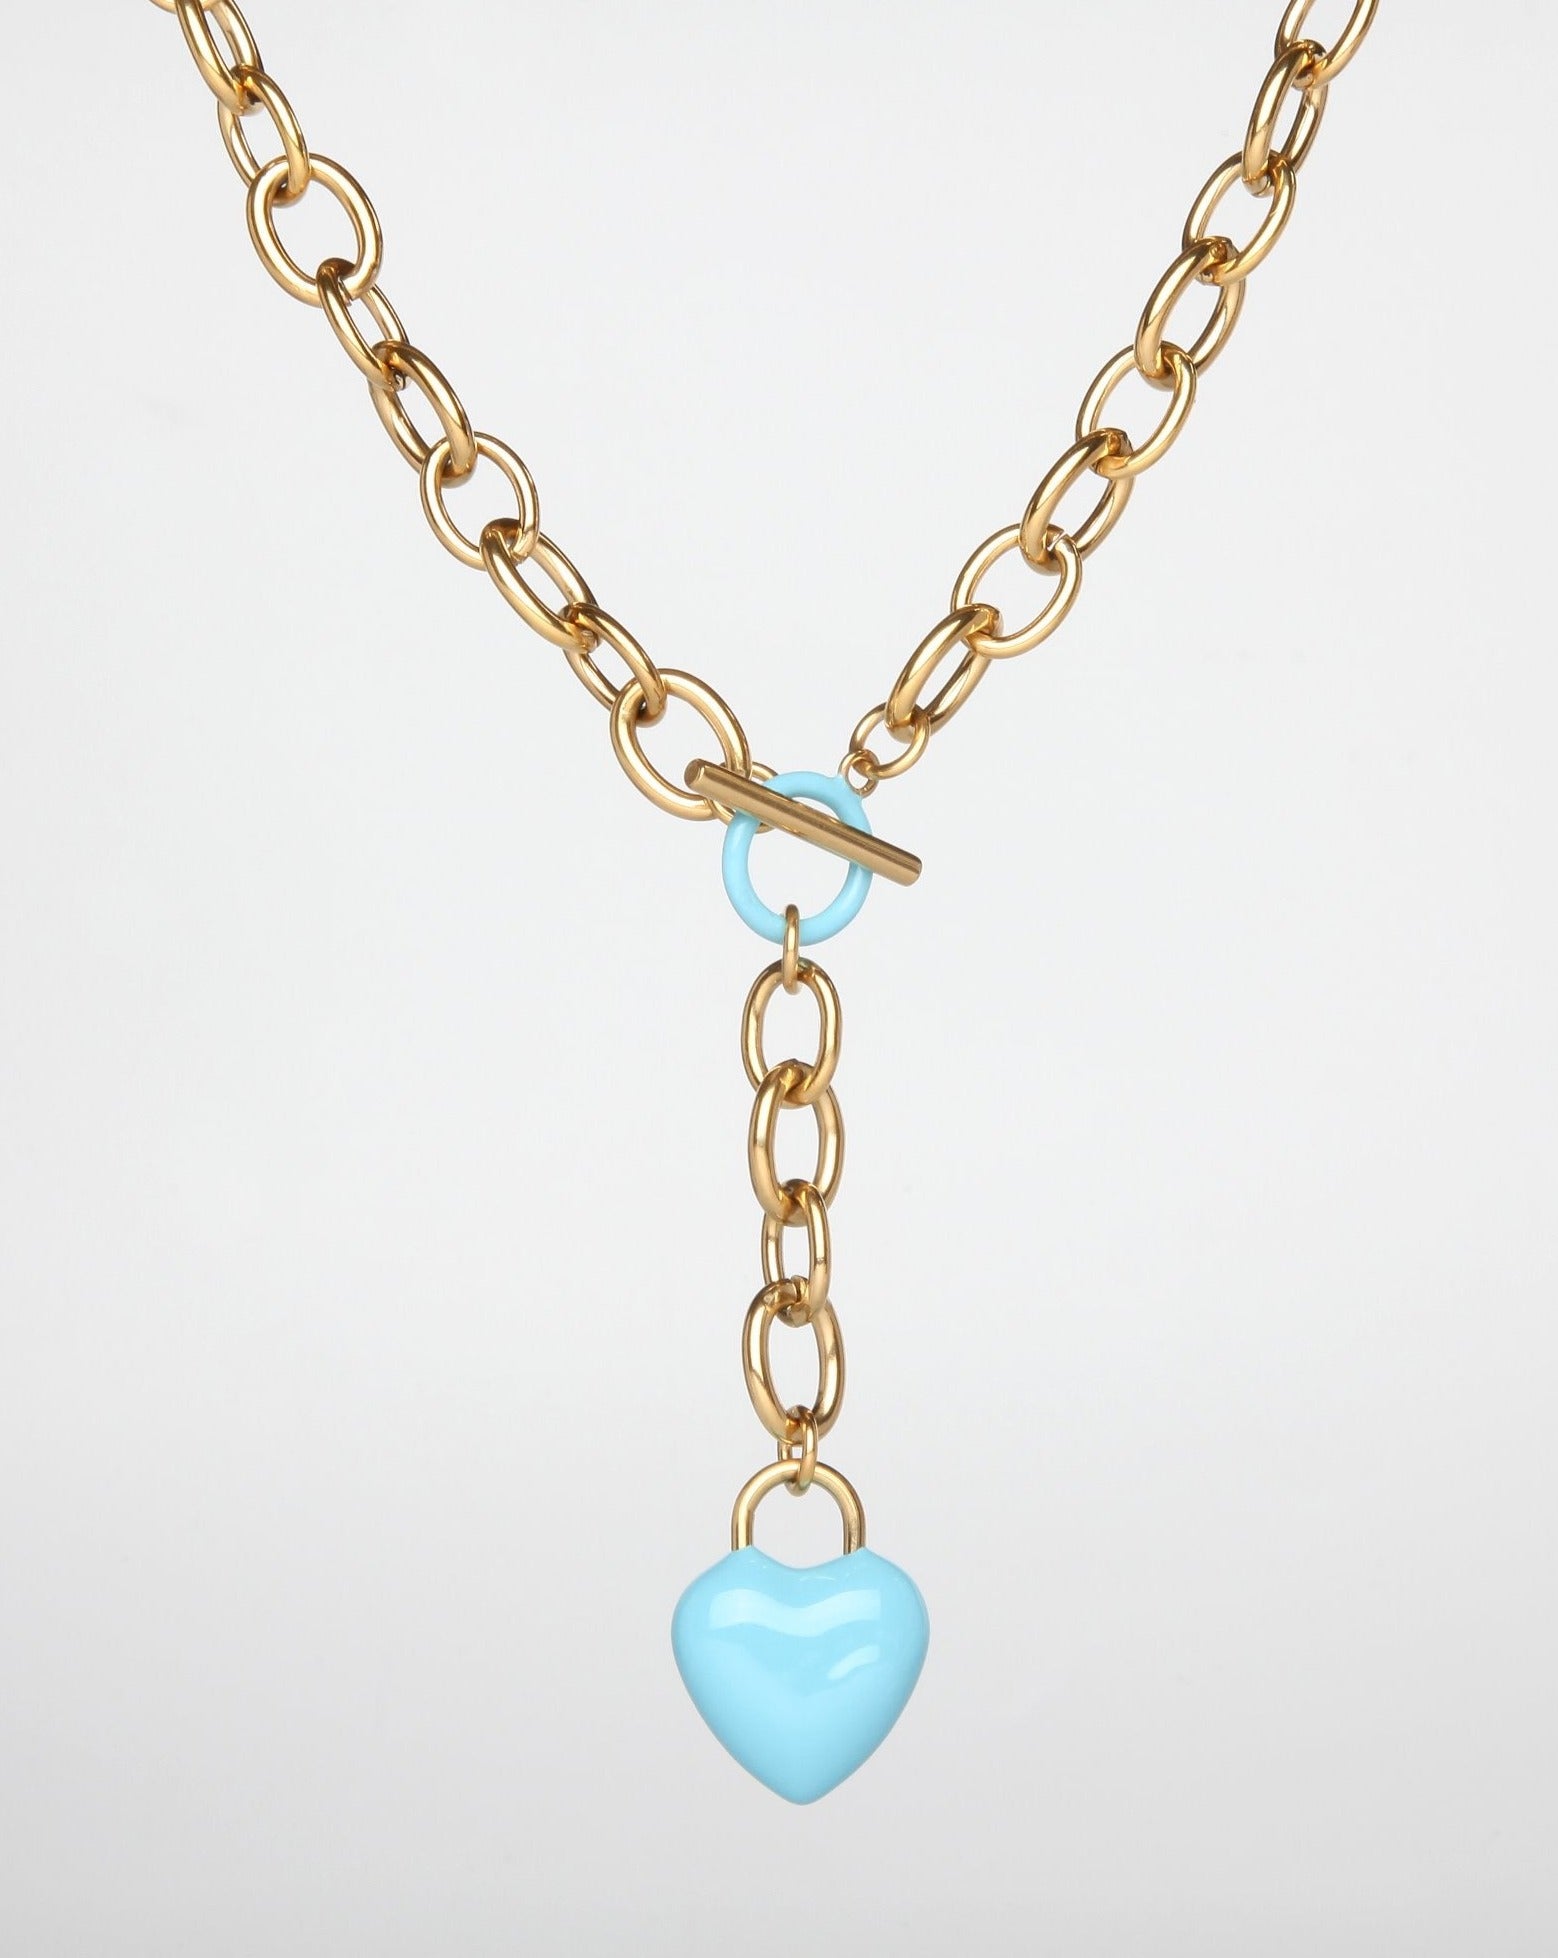 A gold necklace featuring interlocking links has a toggle clasp and a dangling light blue, enamel-coated heart-shaped pendant. The heart is shiny and smooth, contrasting with the metallic texture of the chain. Reminiscent of "The Kiss," it evokes timeless romance against a plain white background. This is the For Art's Sake® The Kiss Necklace Pink.